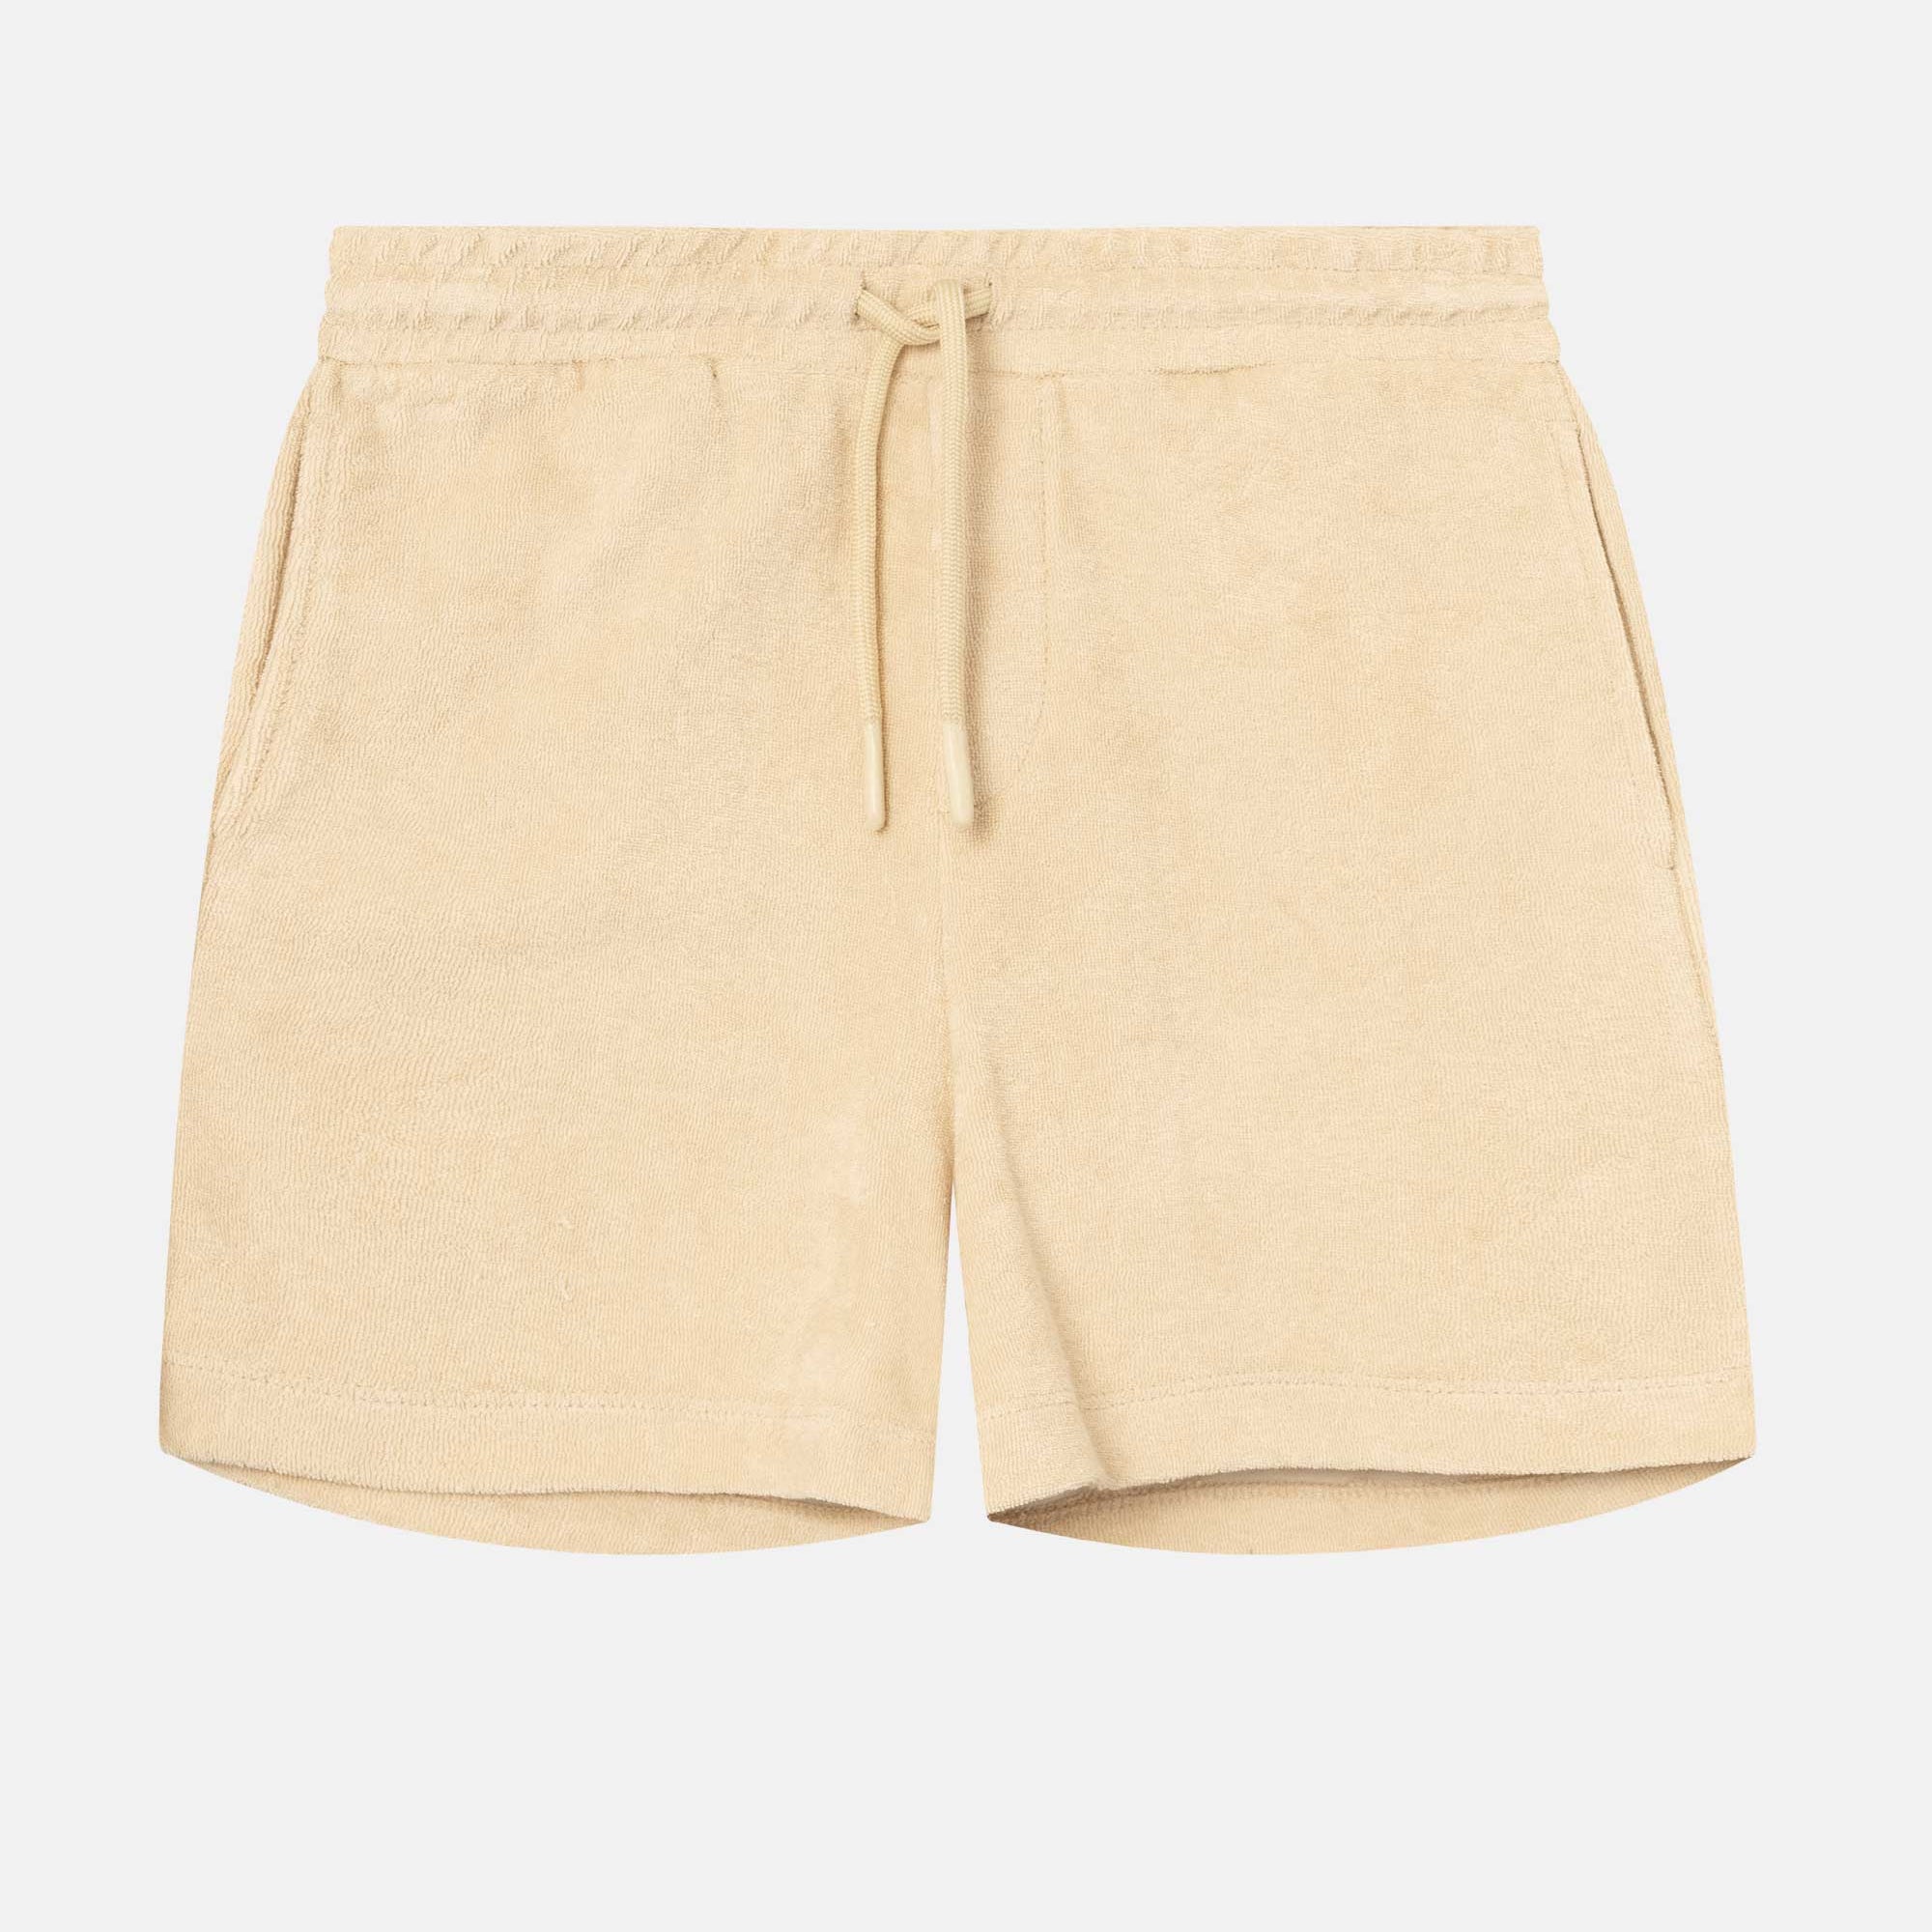 Beige mid length shorts in terry toweling fabric with drawdtring and two side pockets.